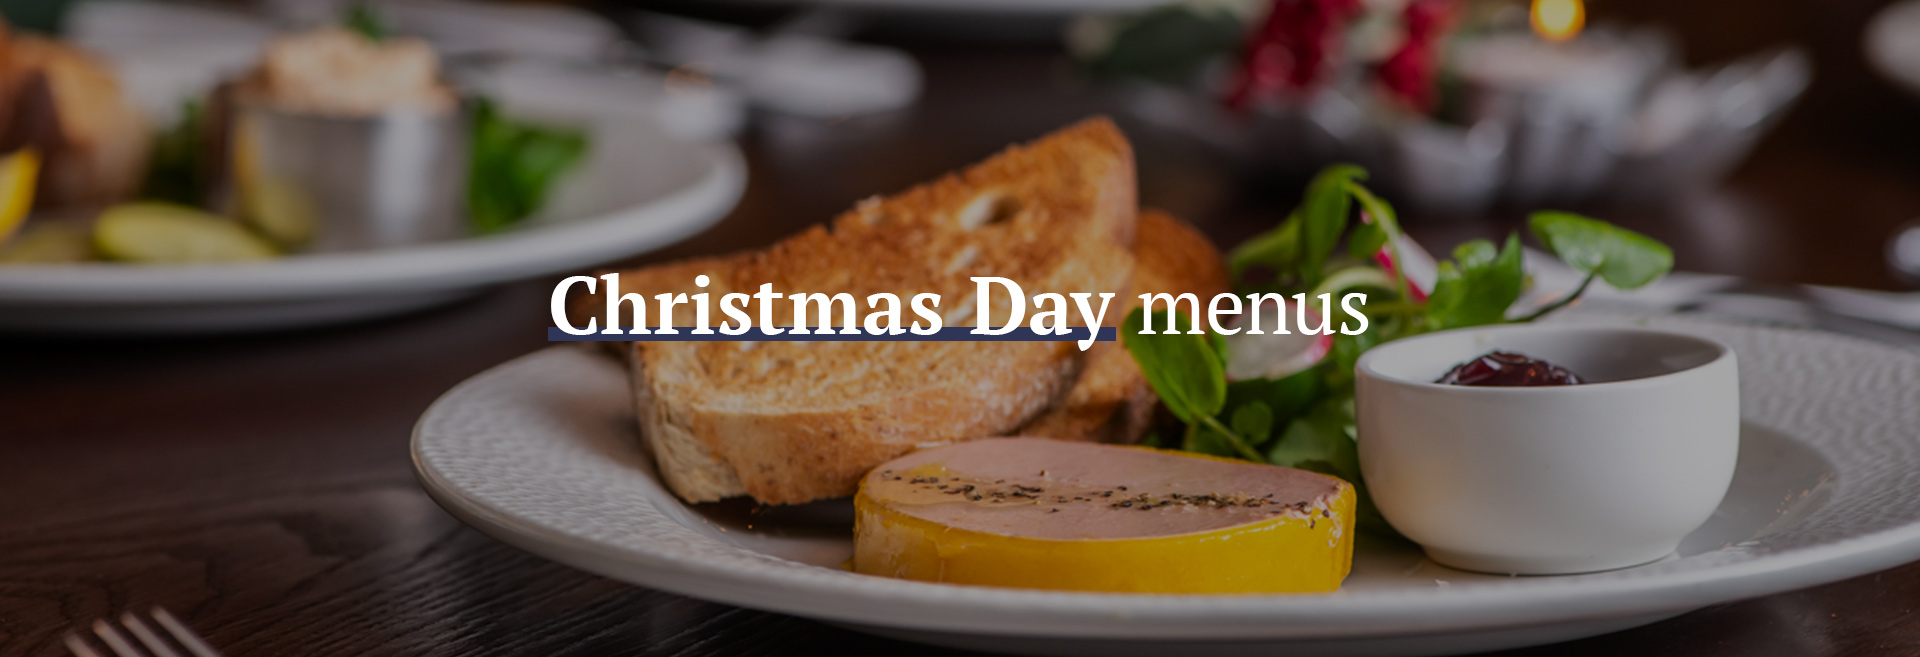 Christmas Day Menu at The Woodstock Arms